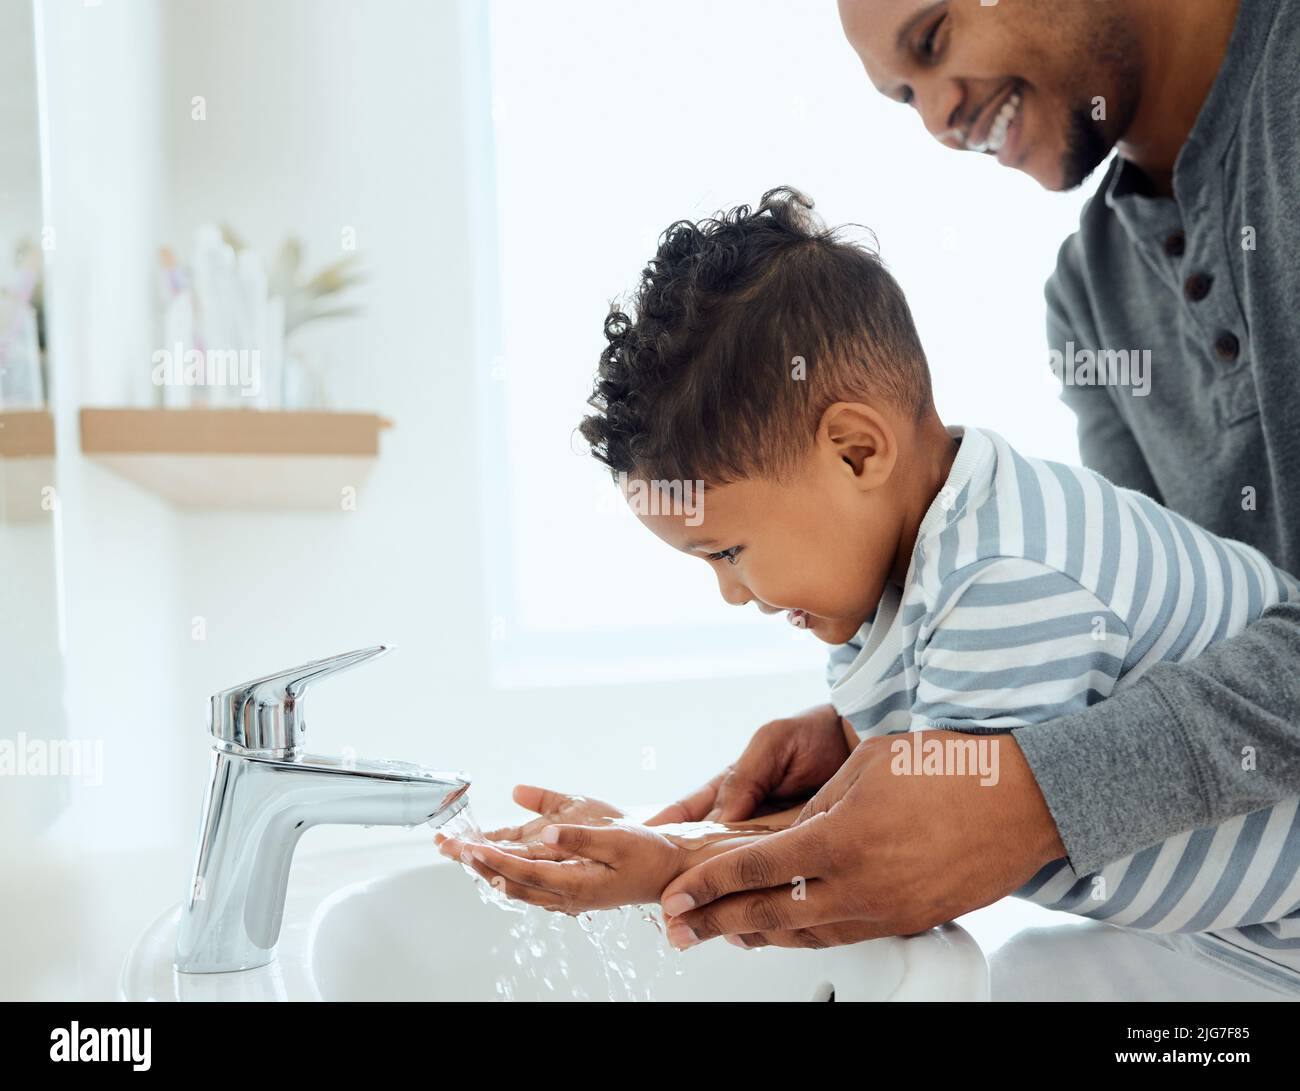 Wash them thoroughly. Shot of an adorable little boy washing his hands with the help of his father at home. Stock Photo